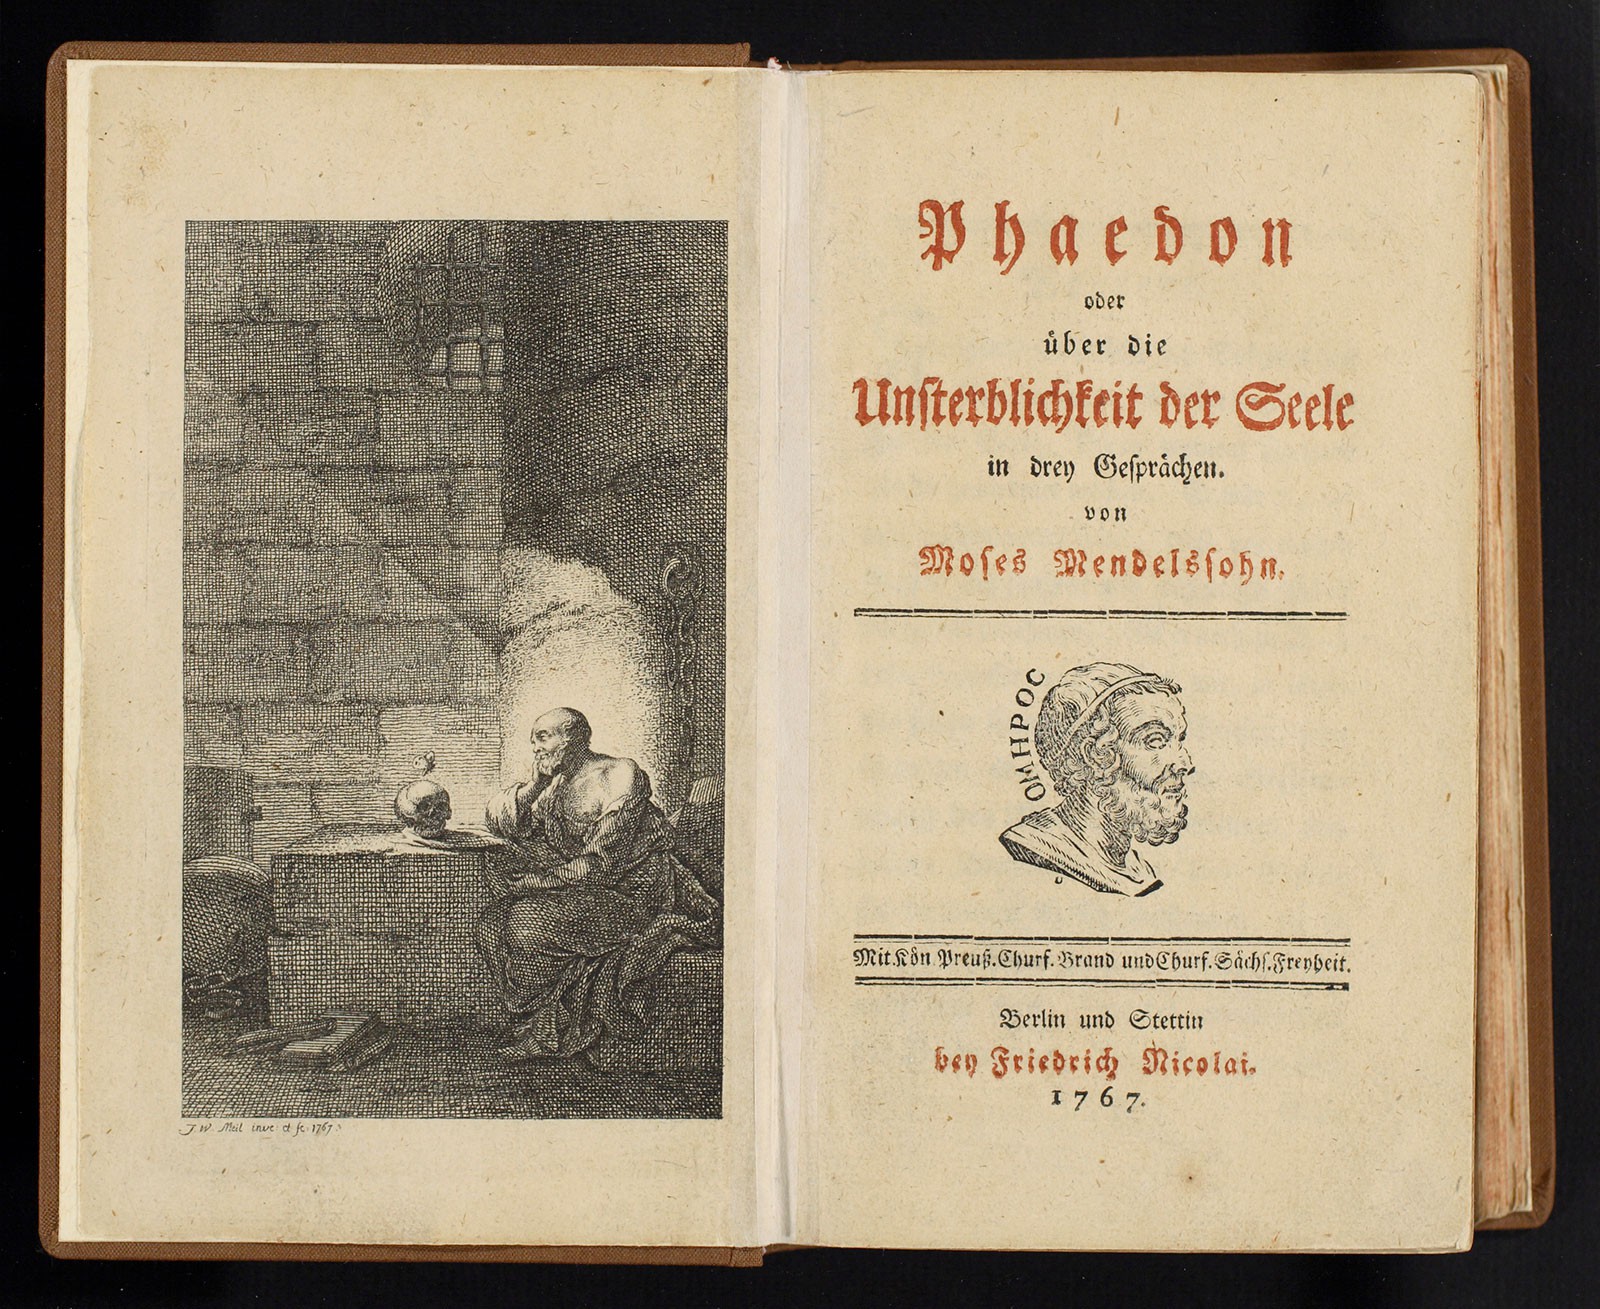 In his bestseller Phaedon, Moses revisits Plato’s Phaedo, which relates the condemned Socrates’s final discourse before his death, while adding his own moral and theological proof of the soul’s immortal nature.  J.W. Meil, 1767 © bpk / Staatsbibliothek zu Berlin / Photo: Carola Seifert.